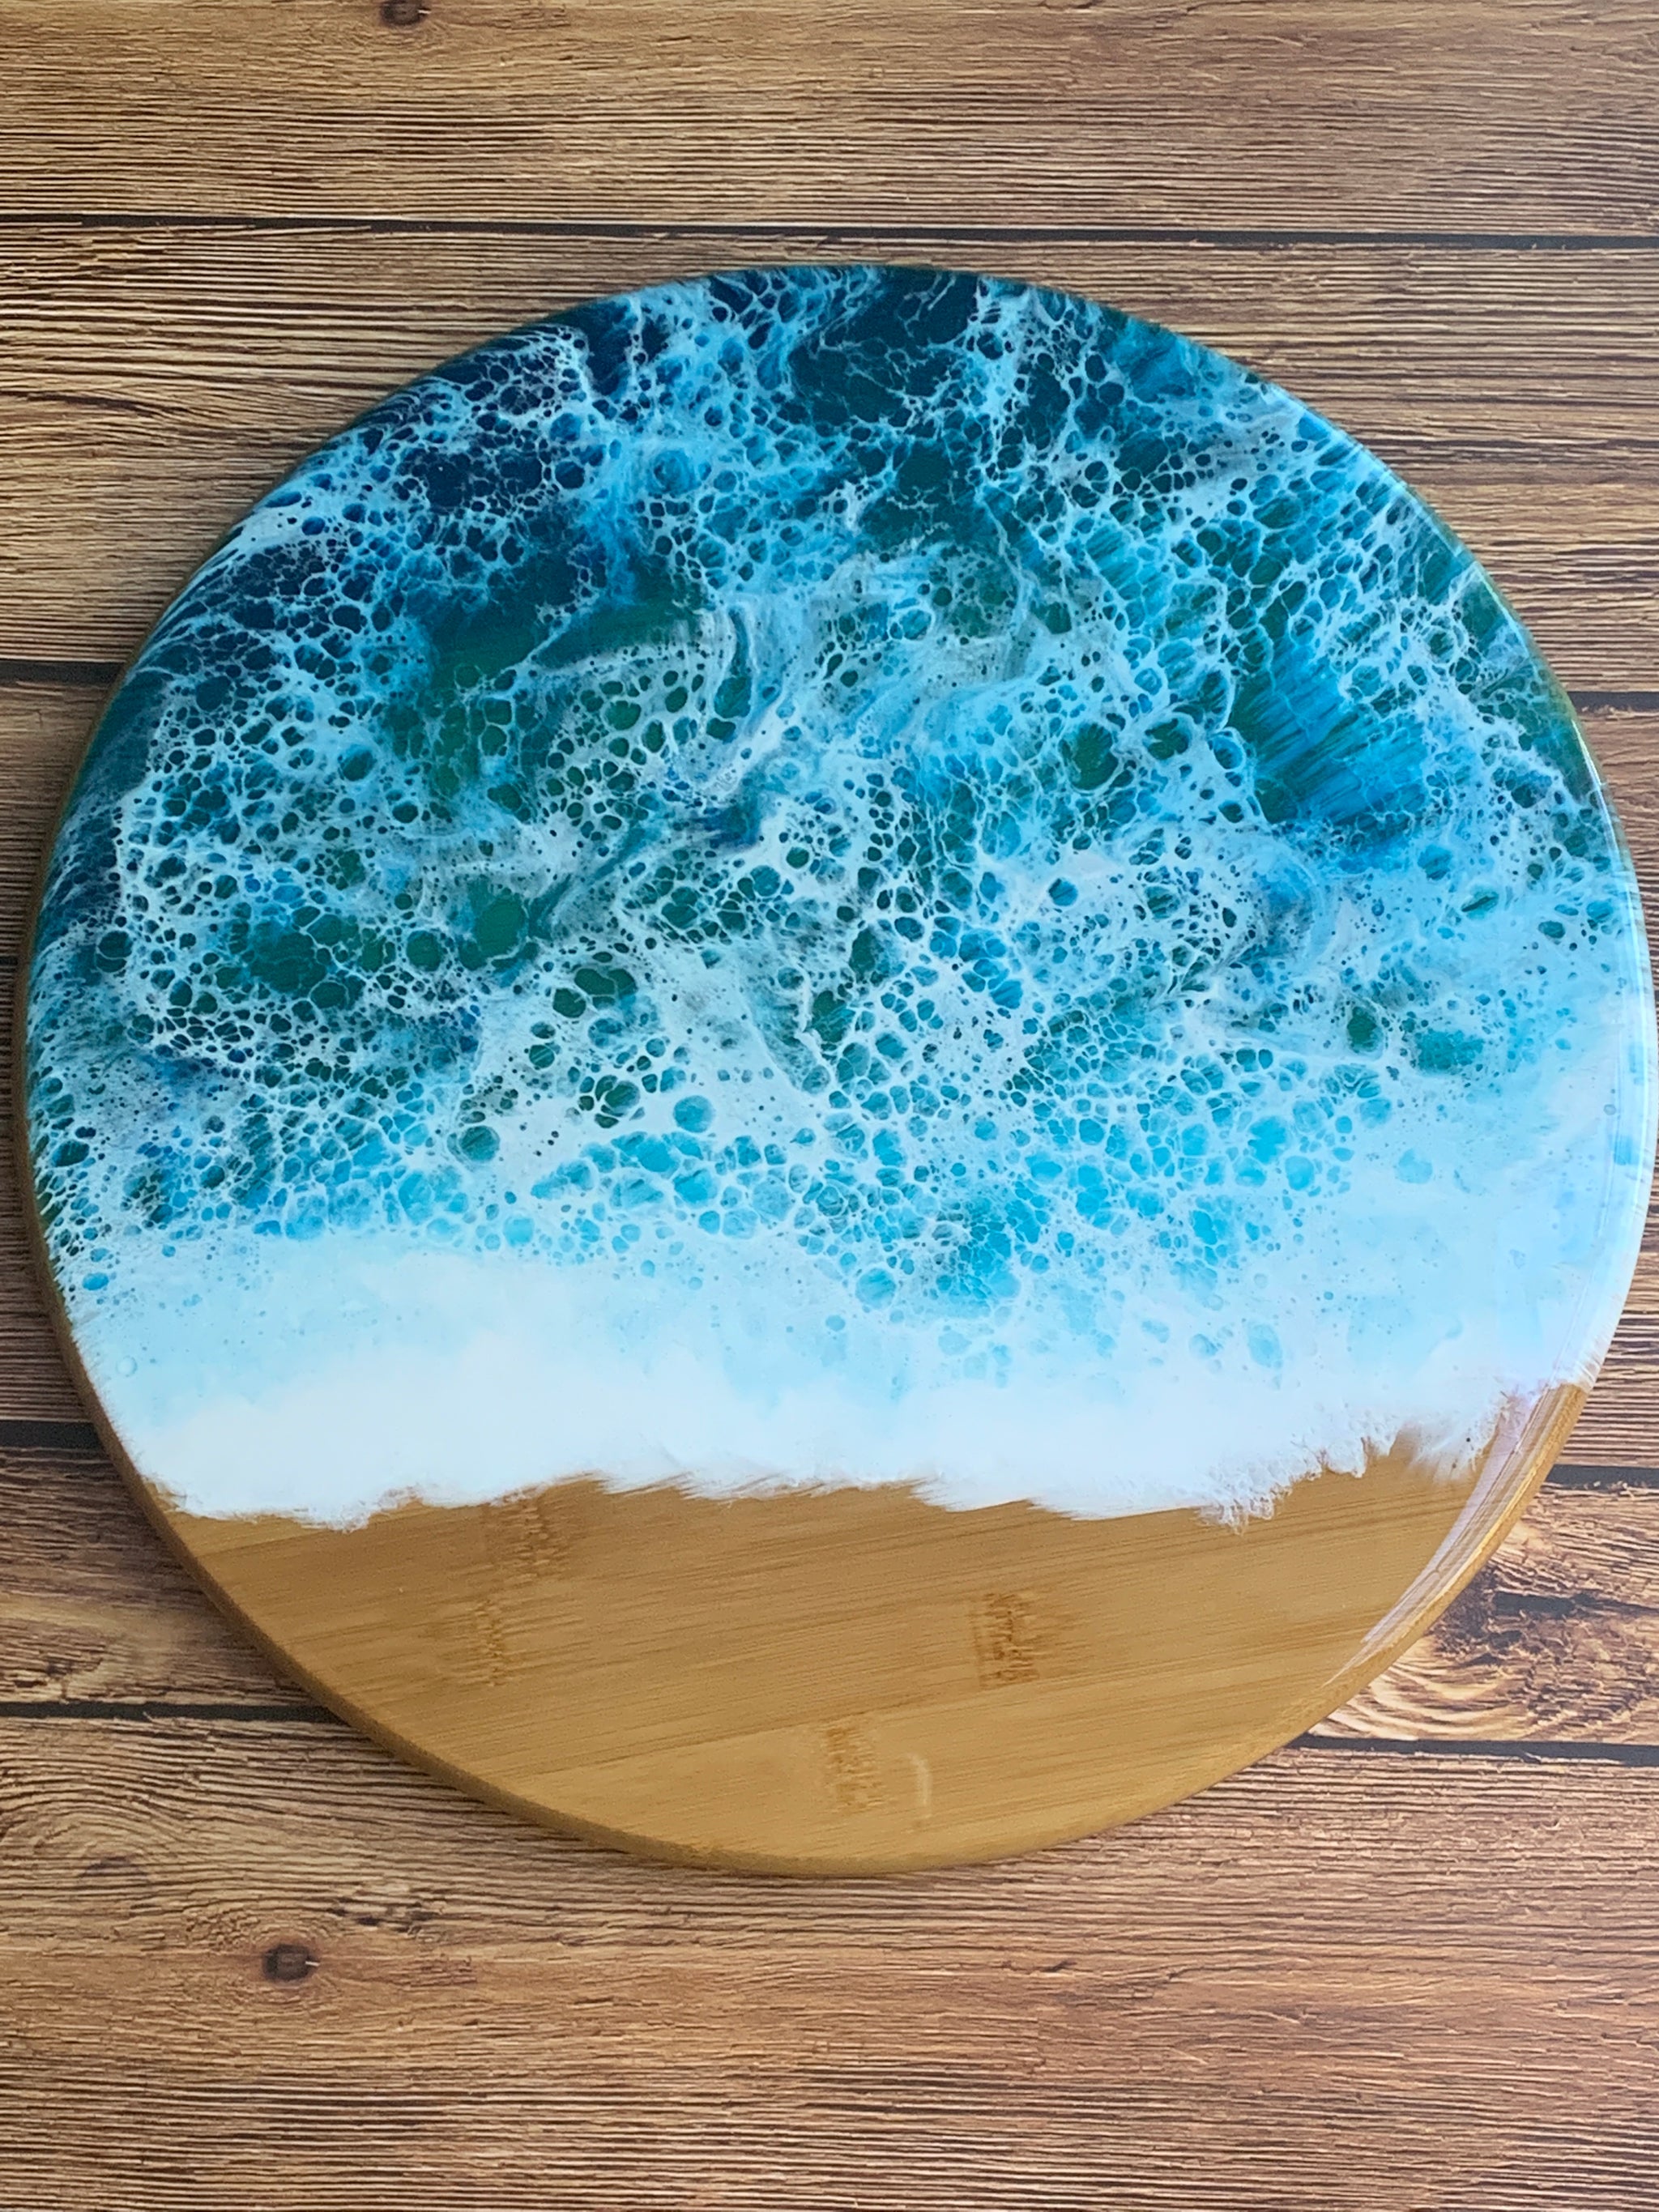 Ocean Turquoise and Green Geode Lazy Susan, Hand Poured Food Safe Epoxy  Resin on Bamboo, Geode Art, Geode Epoxy Resin, Housewarming Gift. 